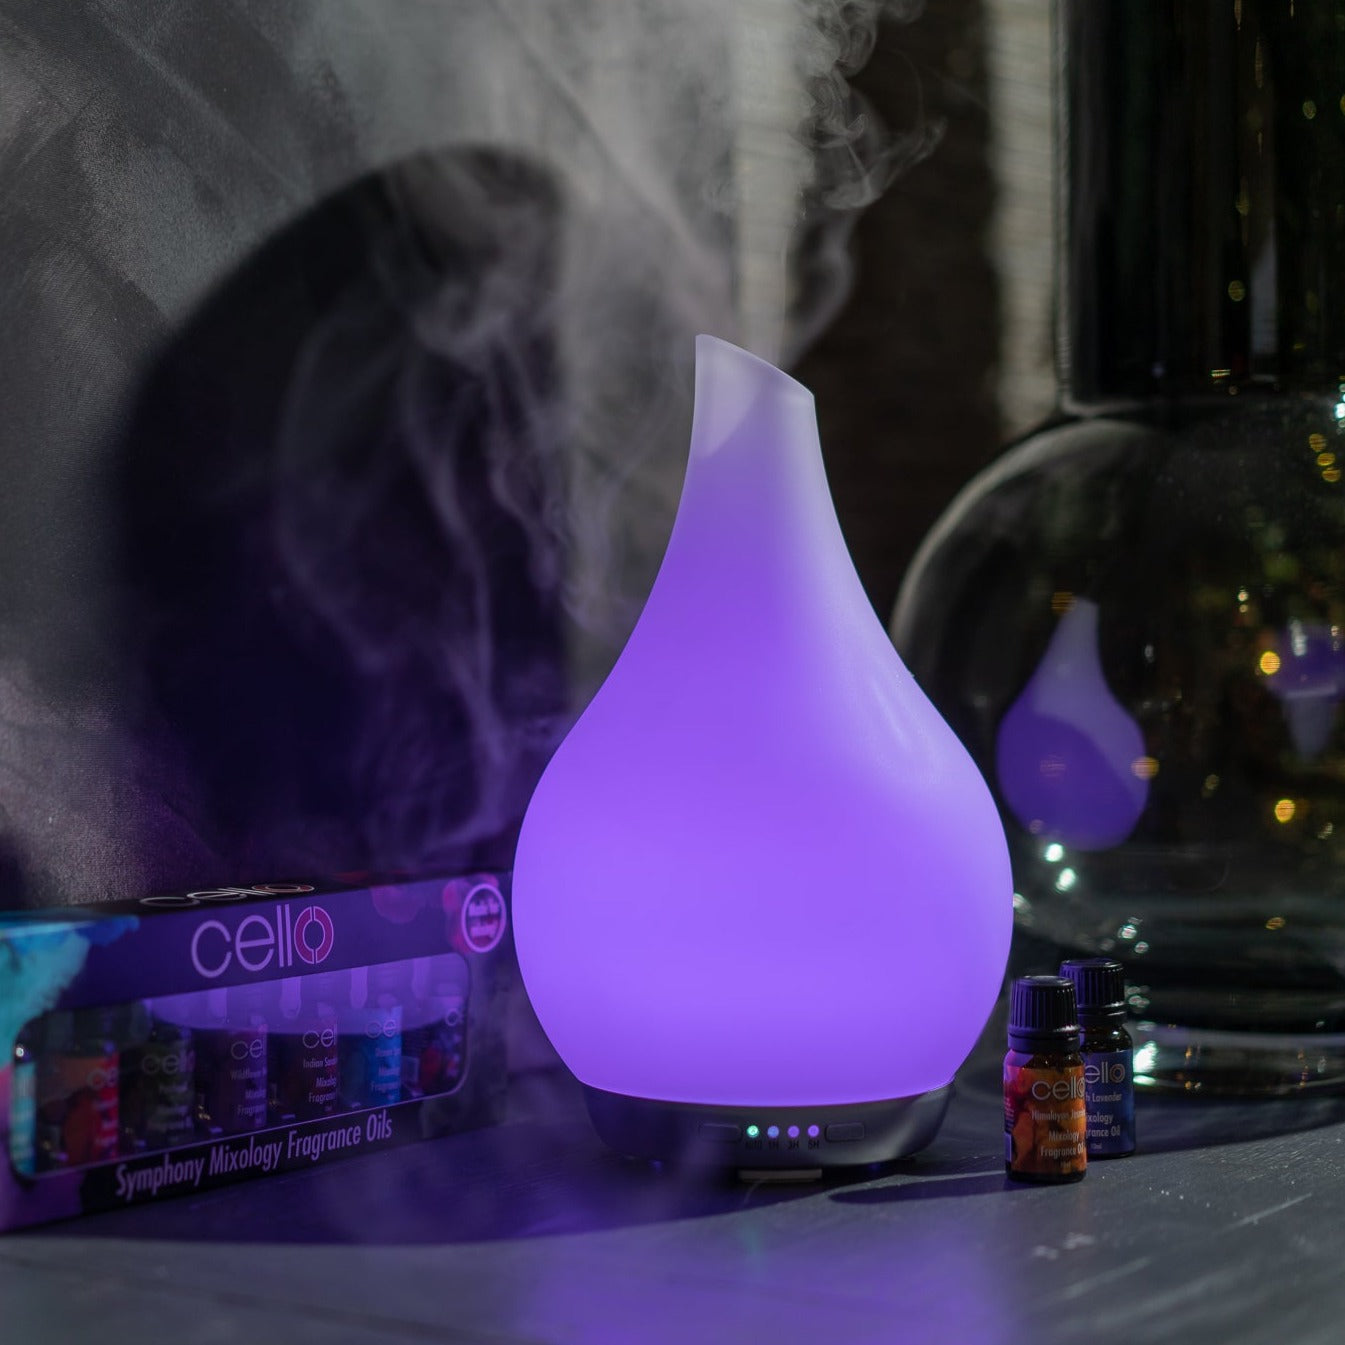 Cello - Large Ultrasonic Diffuser - Art Glass - Frosted